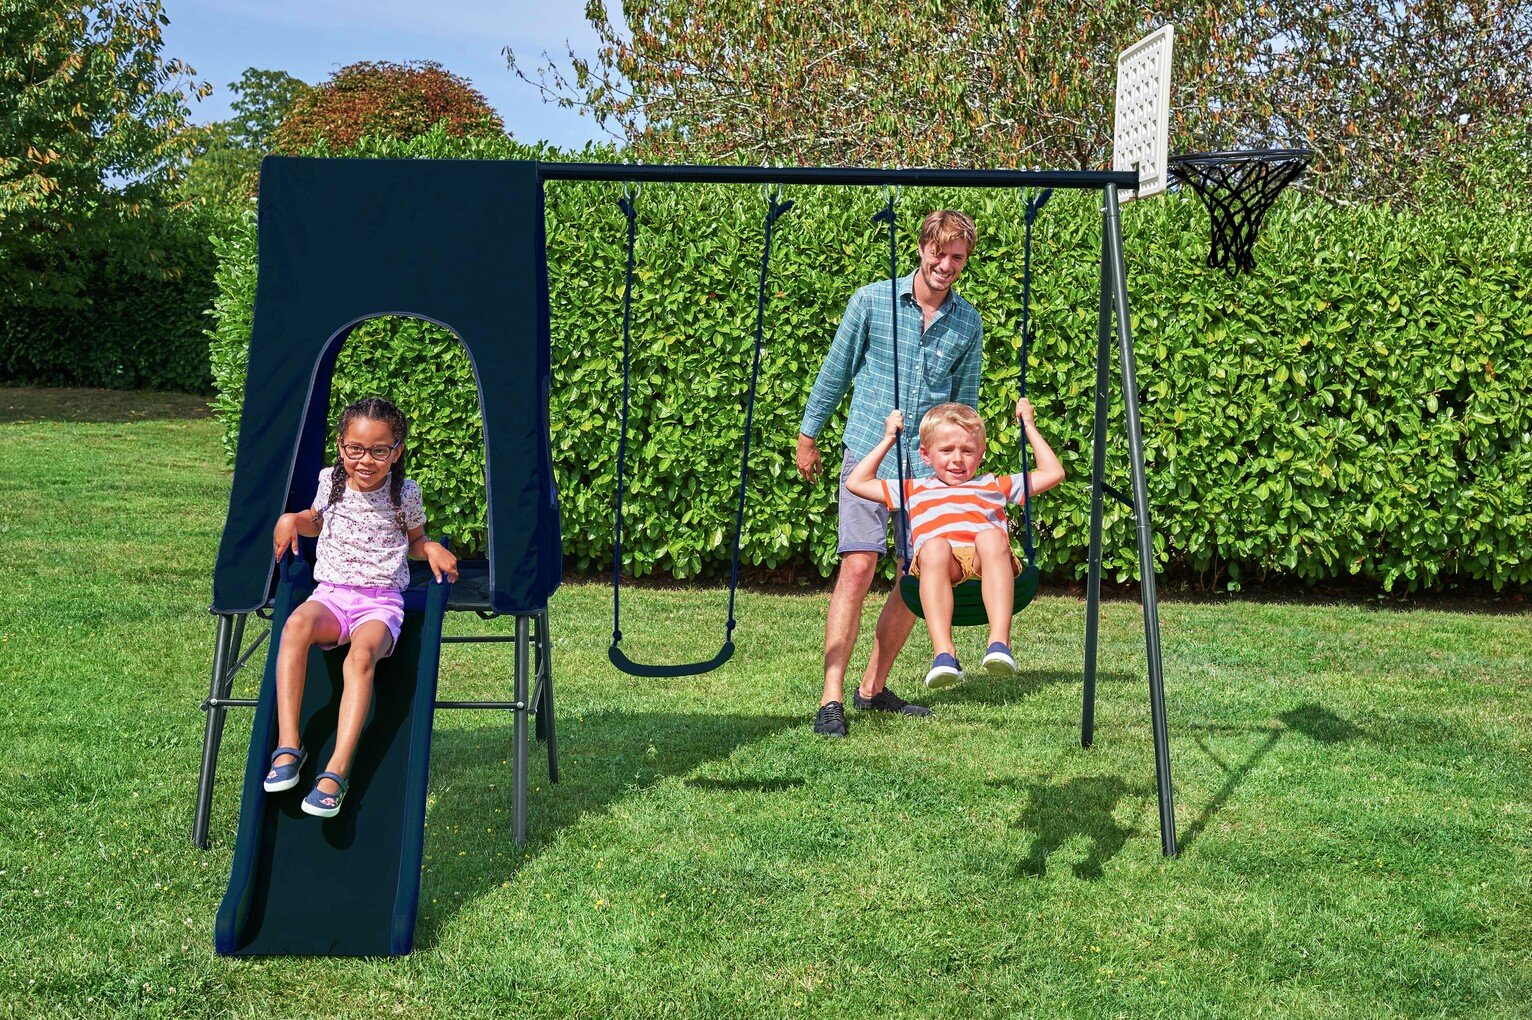 Chad Valley 2 in 1 Toddler and Kids Garden Swing Review